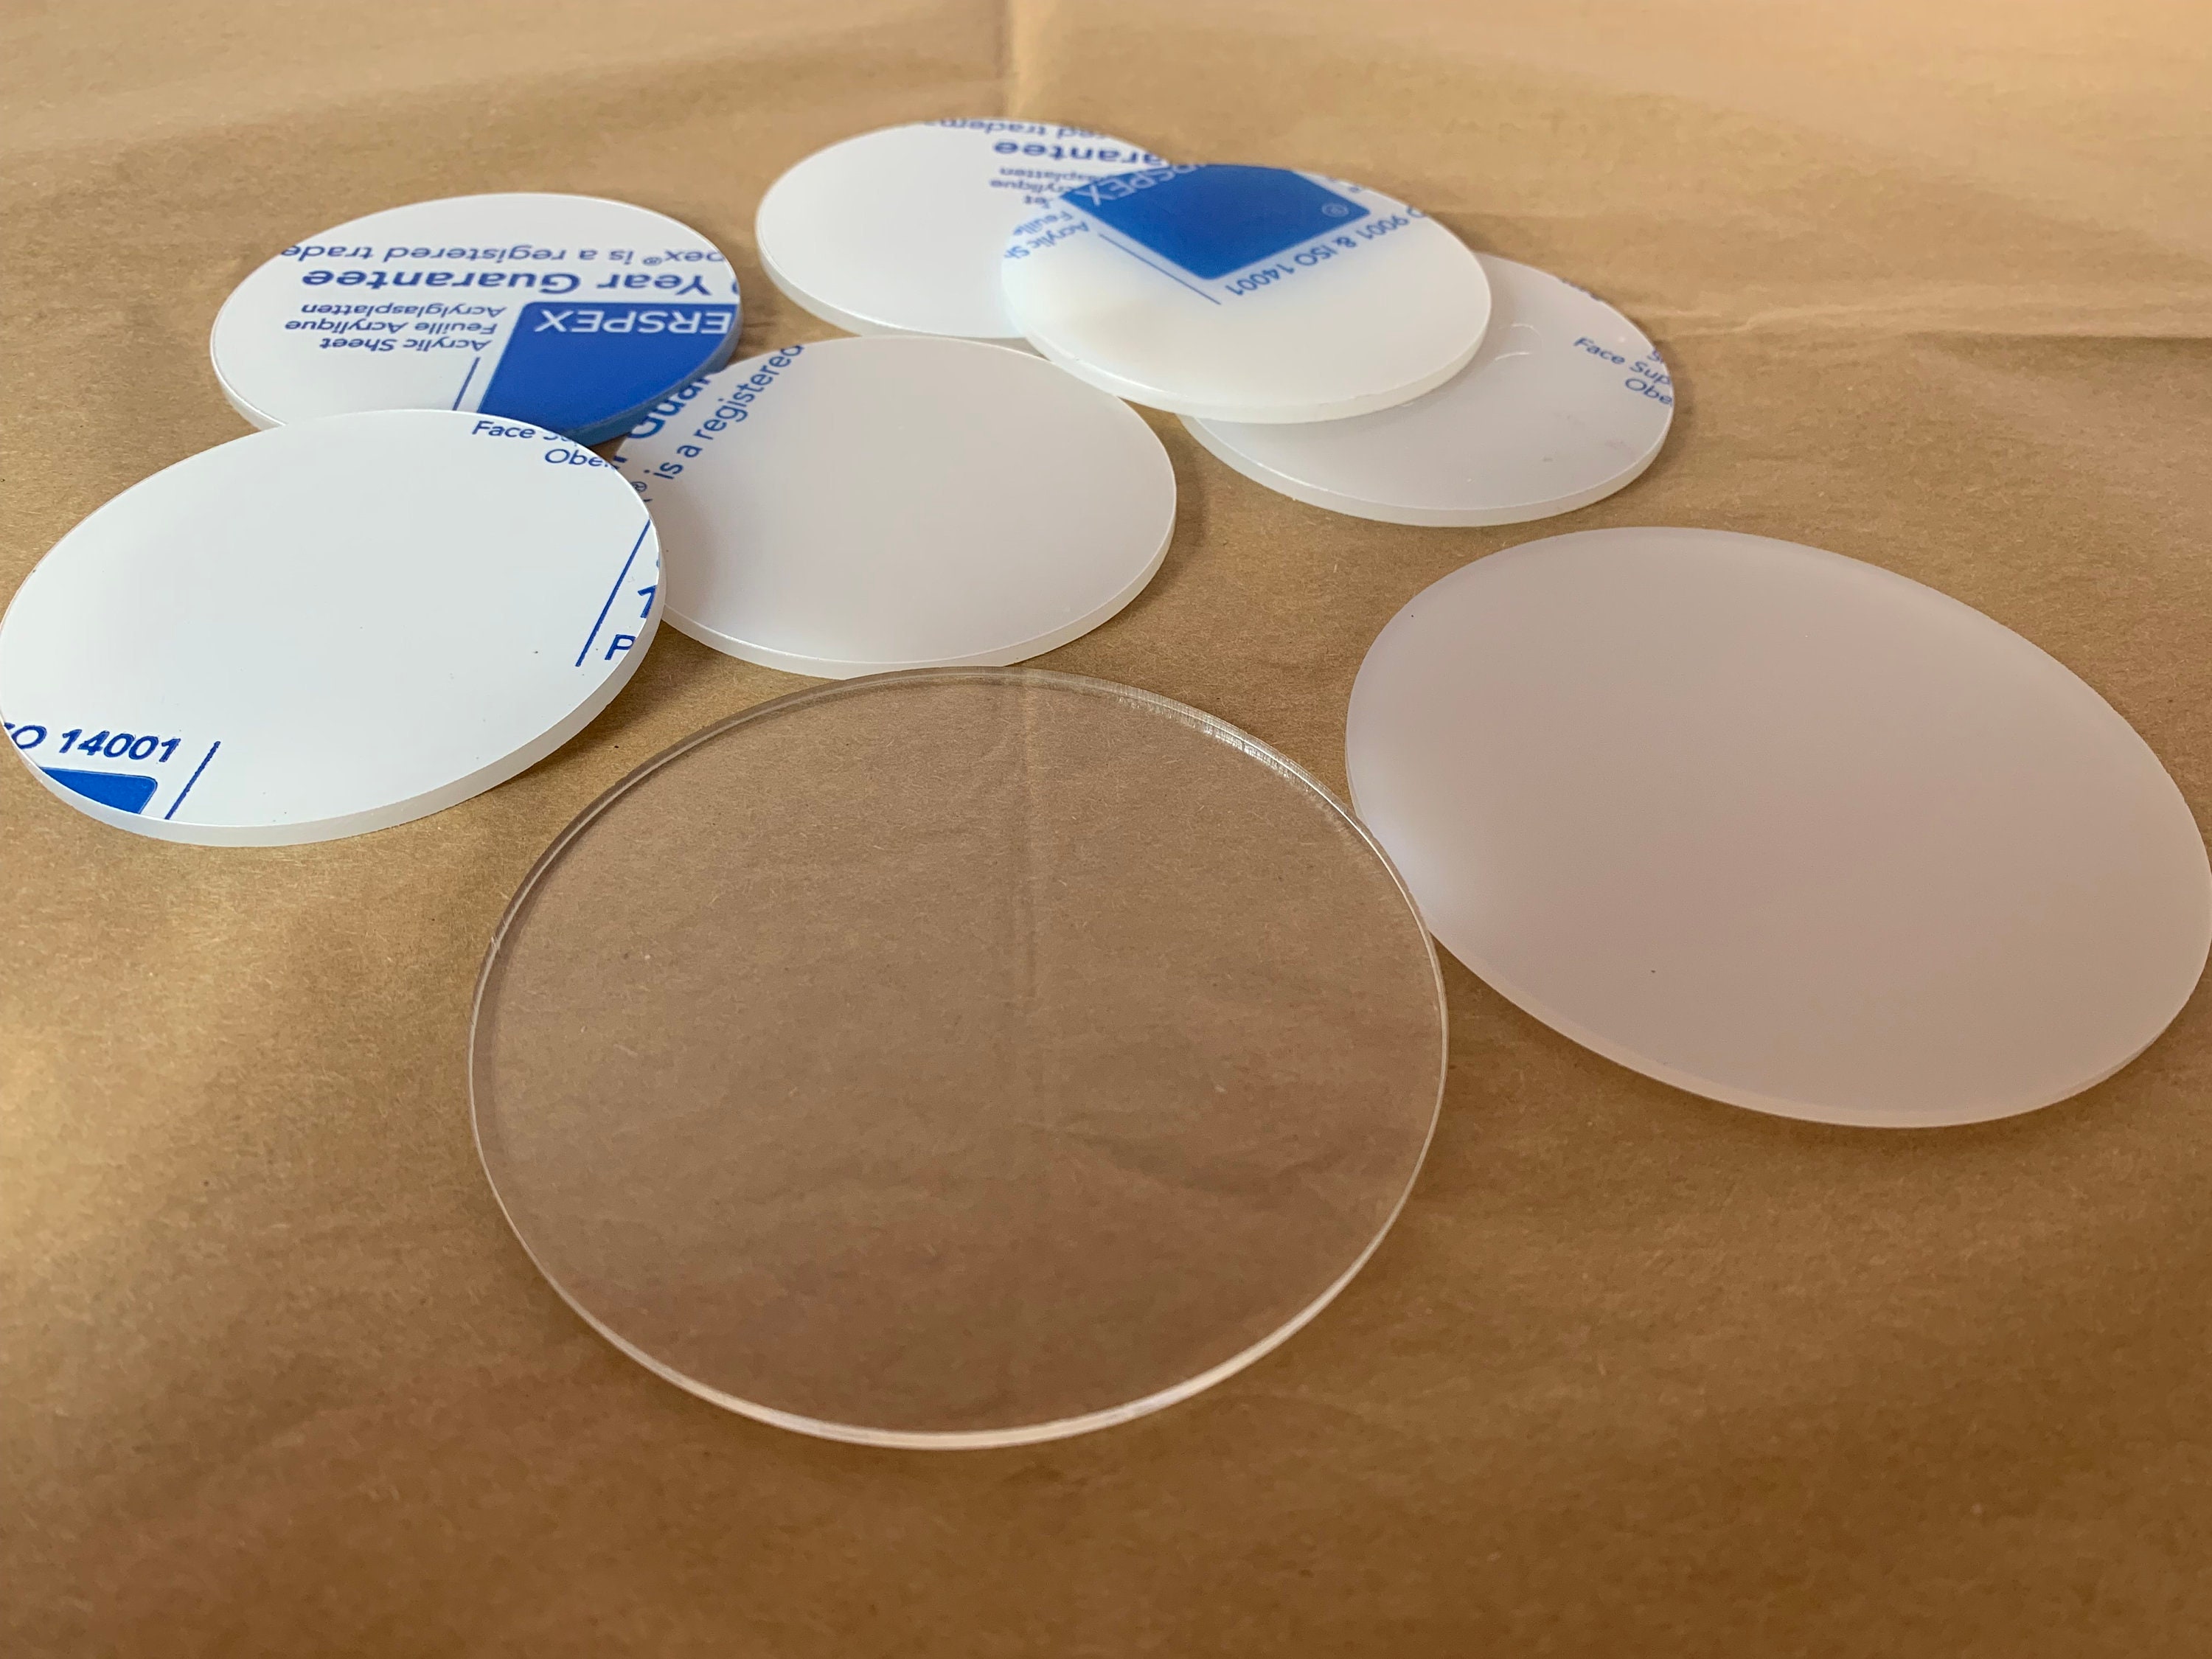 1/8 Thick Clear Acrylic Circles - 1 - 11 Gloss on both sides - For  Crafts, figure bases, templates, and more!